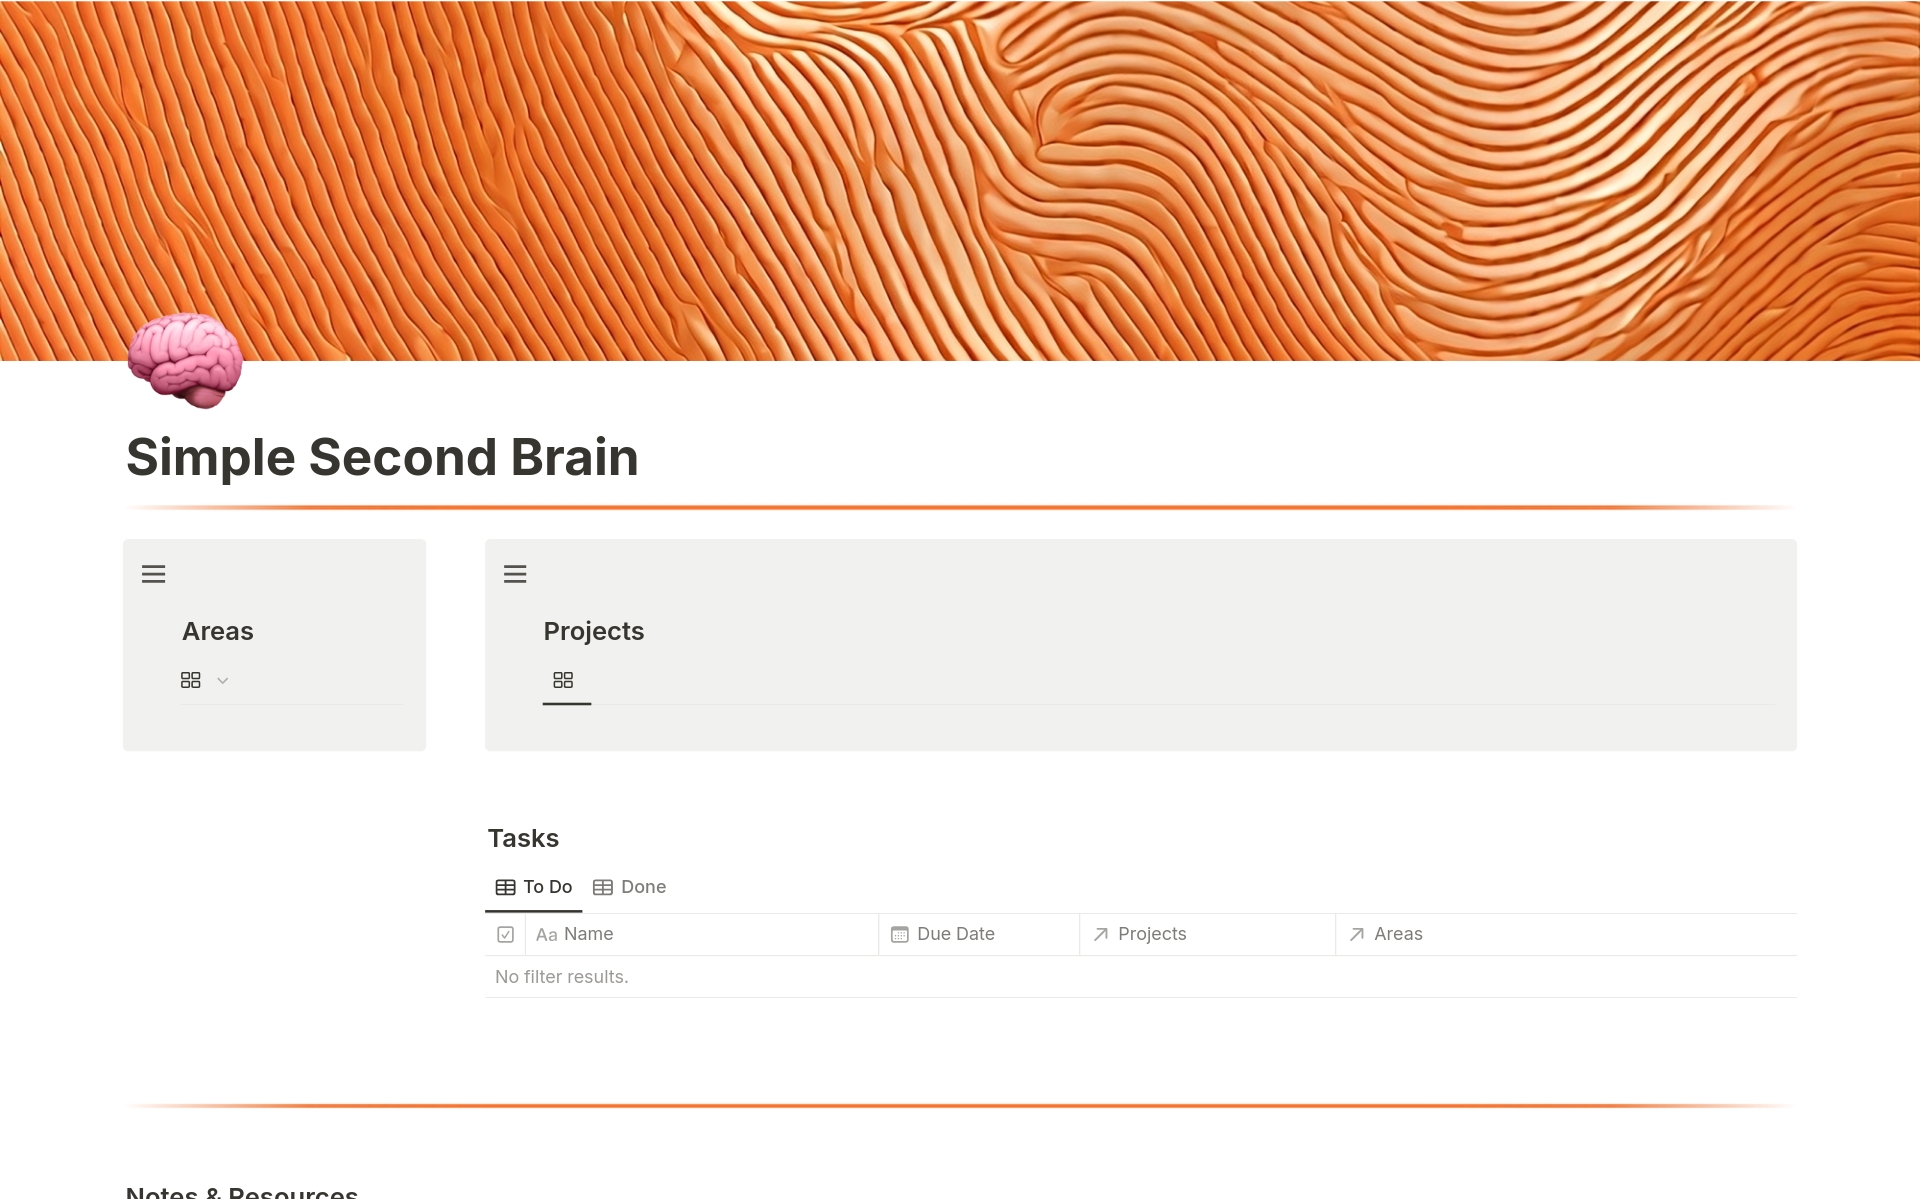 With the Simple Second Brain you have a Template that supports everything you need to become more productive, plan projects and organize resources.